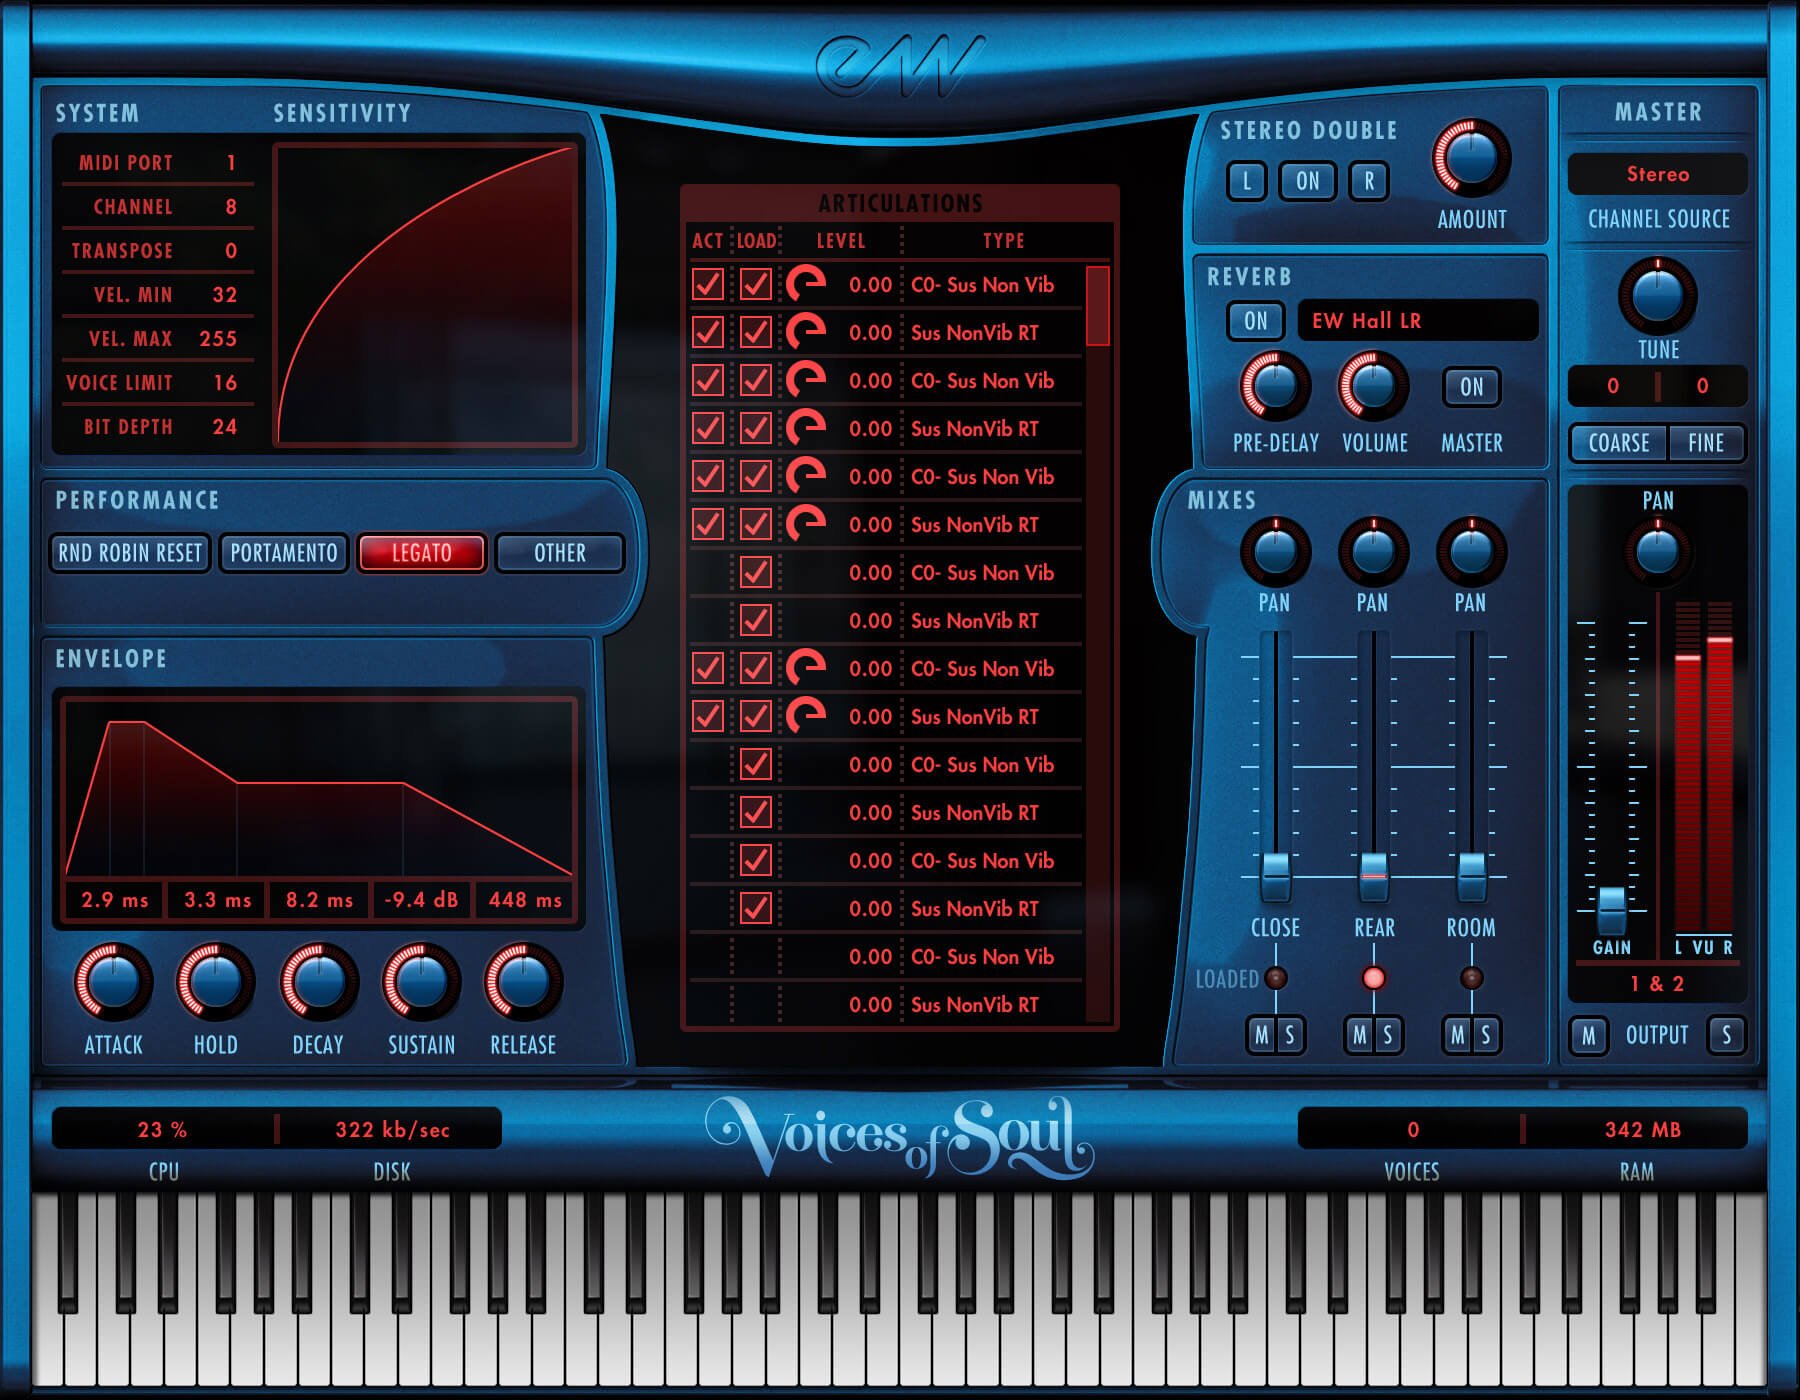 Voice loaded. Инструменты для вокала. Doubler VST stereo. Vocal and instruments. EASTWEST Voices of the Empire VST (Úyanga Bold).